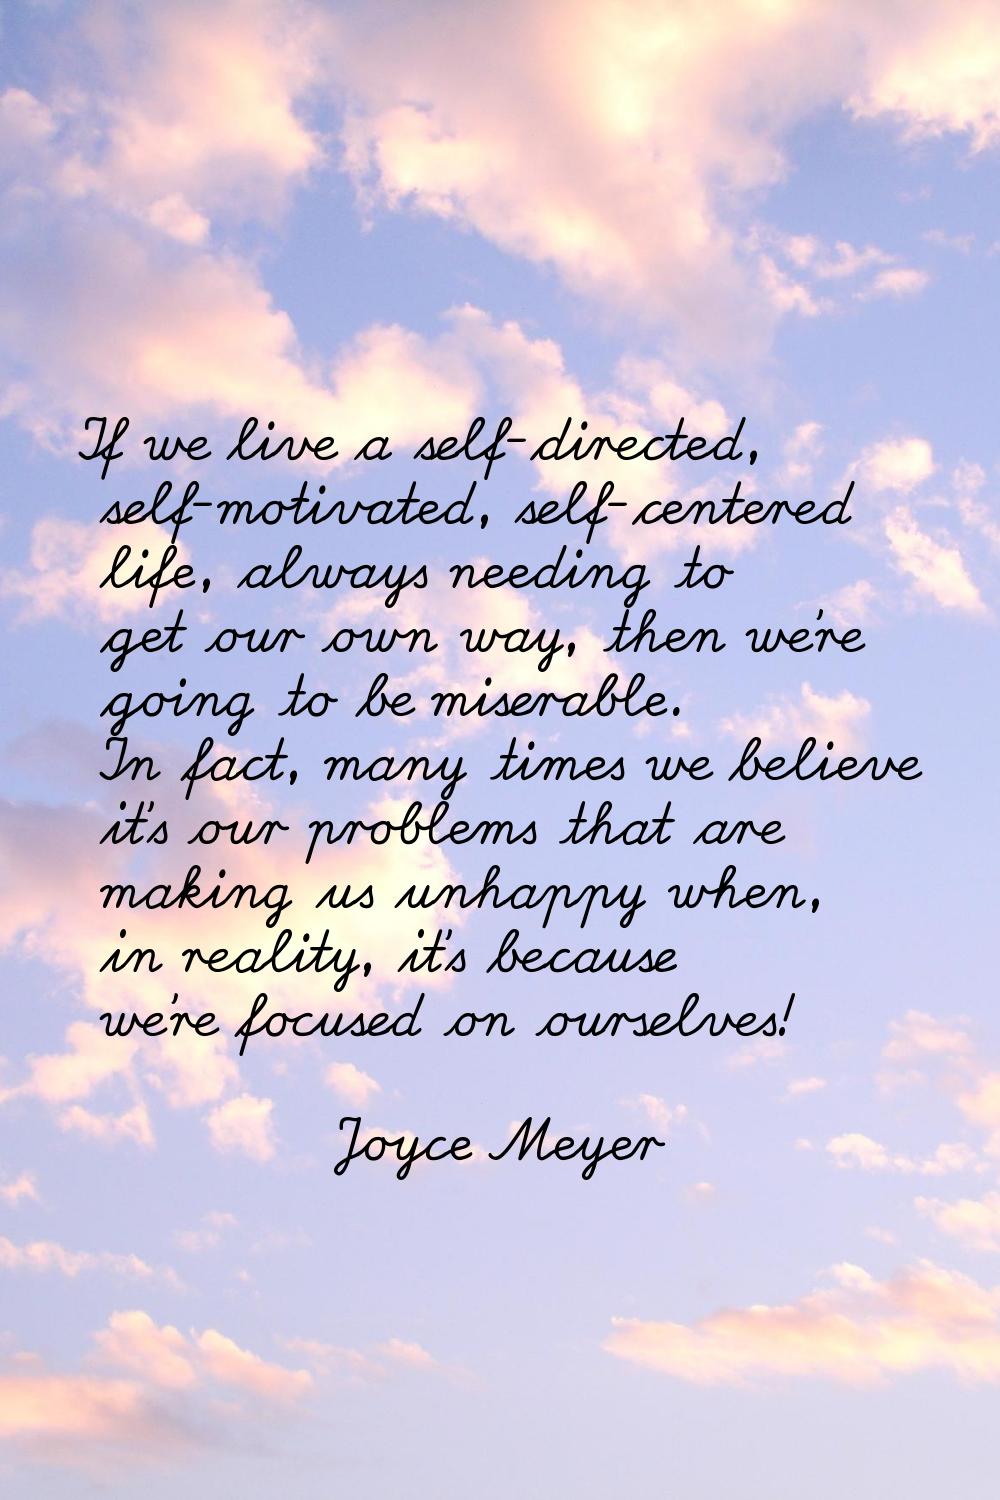 If we live a self-directed, self-motivated, self-centered life, always needing to get our own way, 